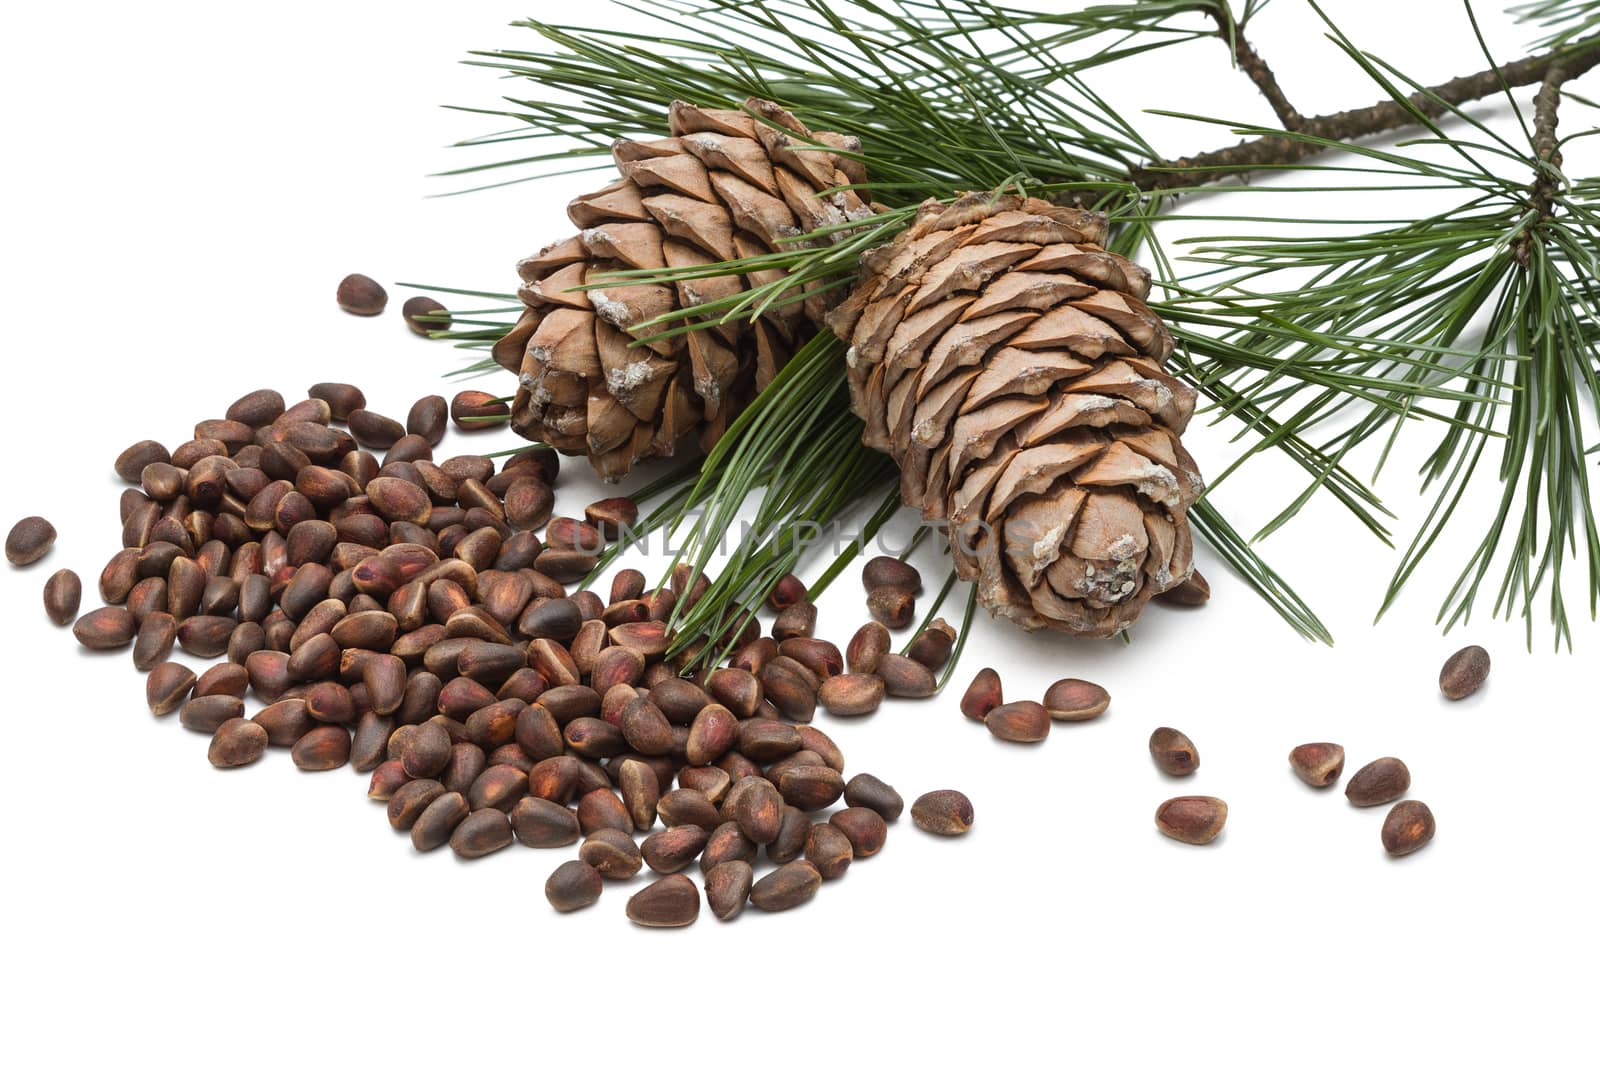 cedar nuts and cedar  cones isolated on white background